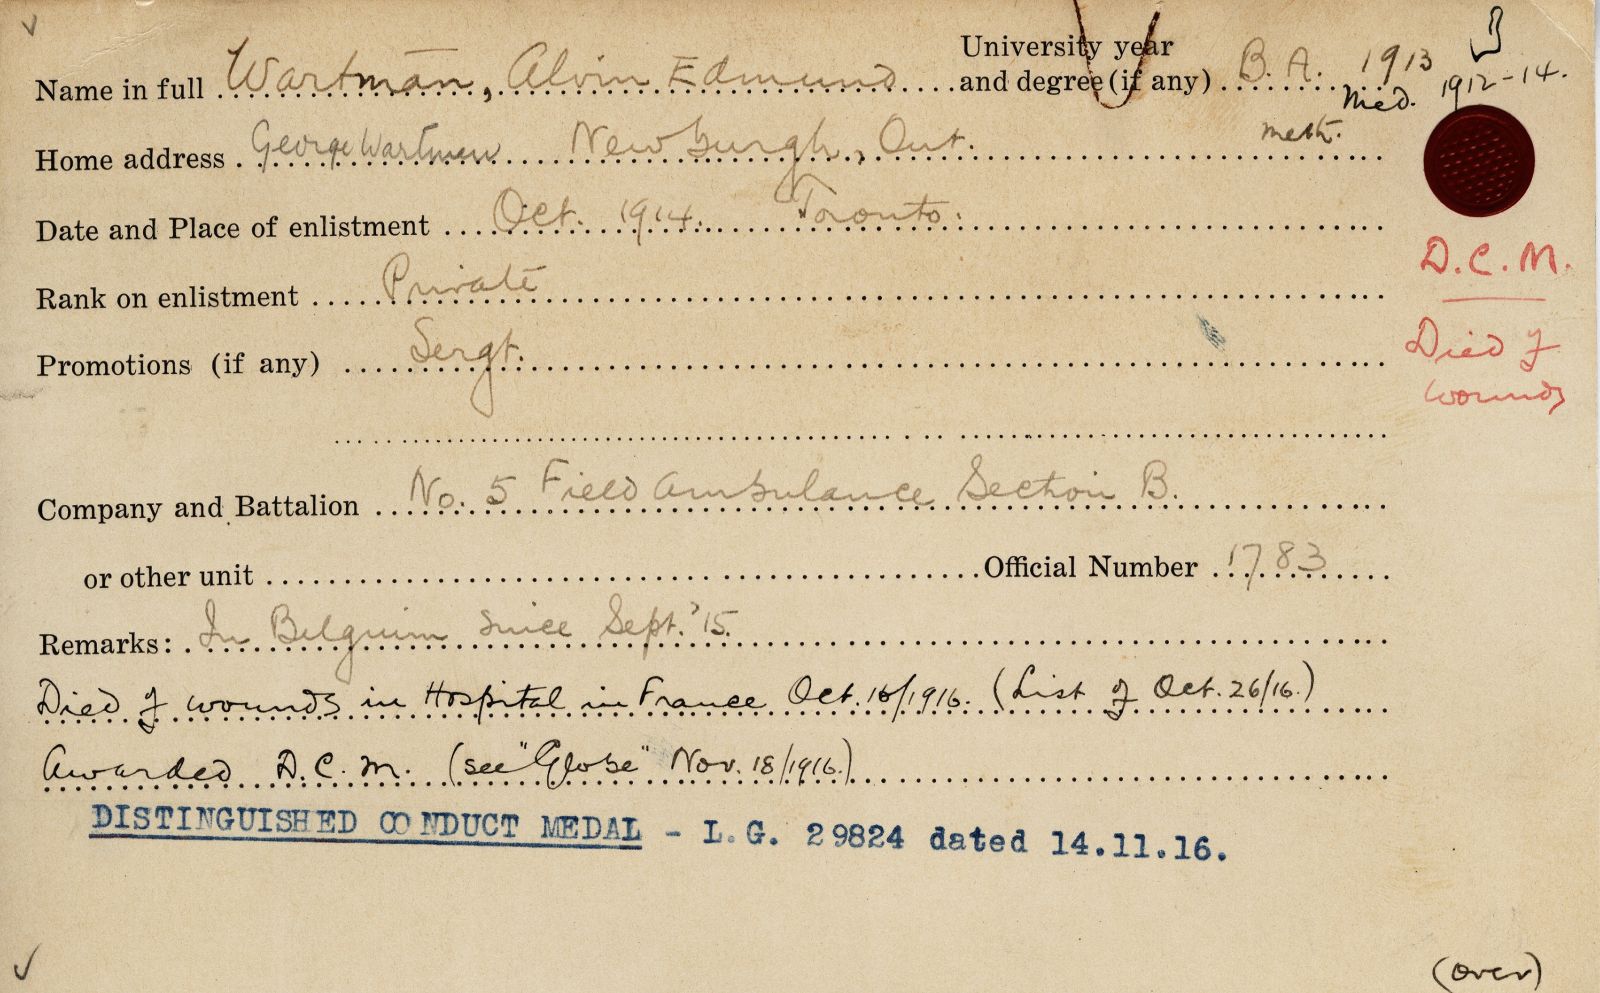 University Military Service Record of Wartman, Front Page